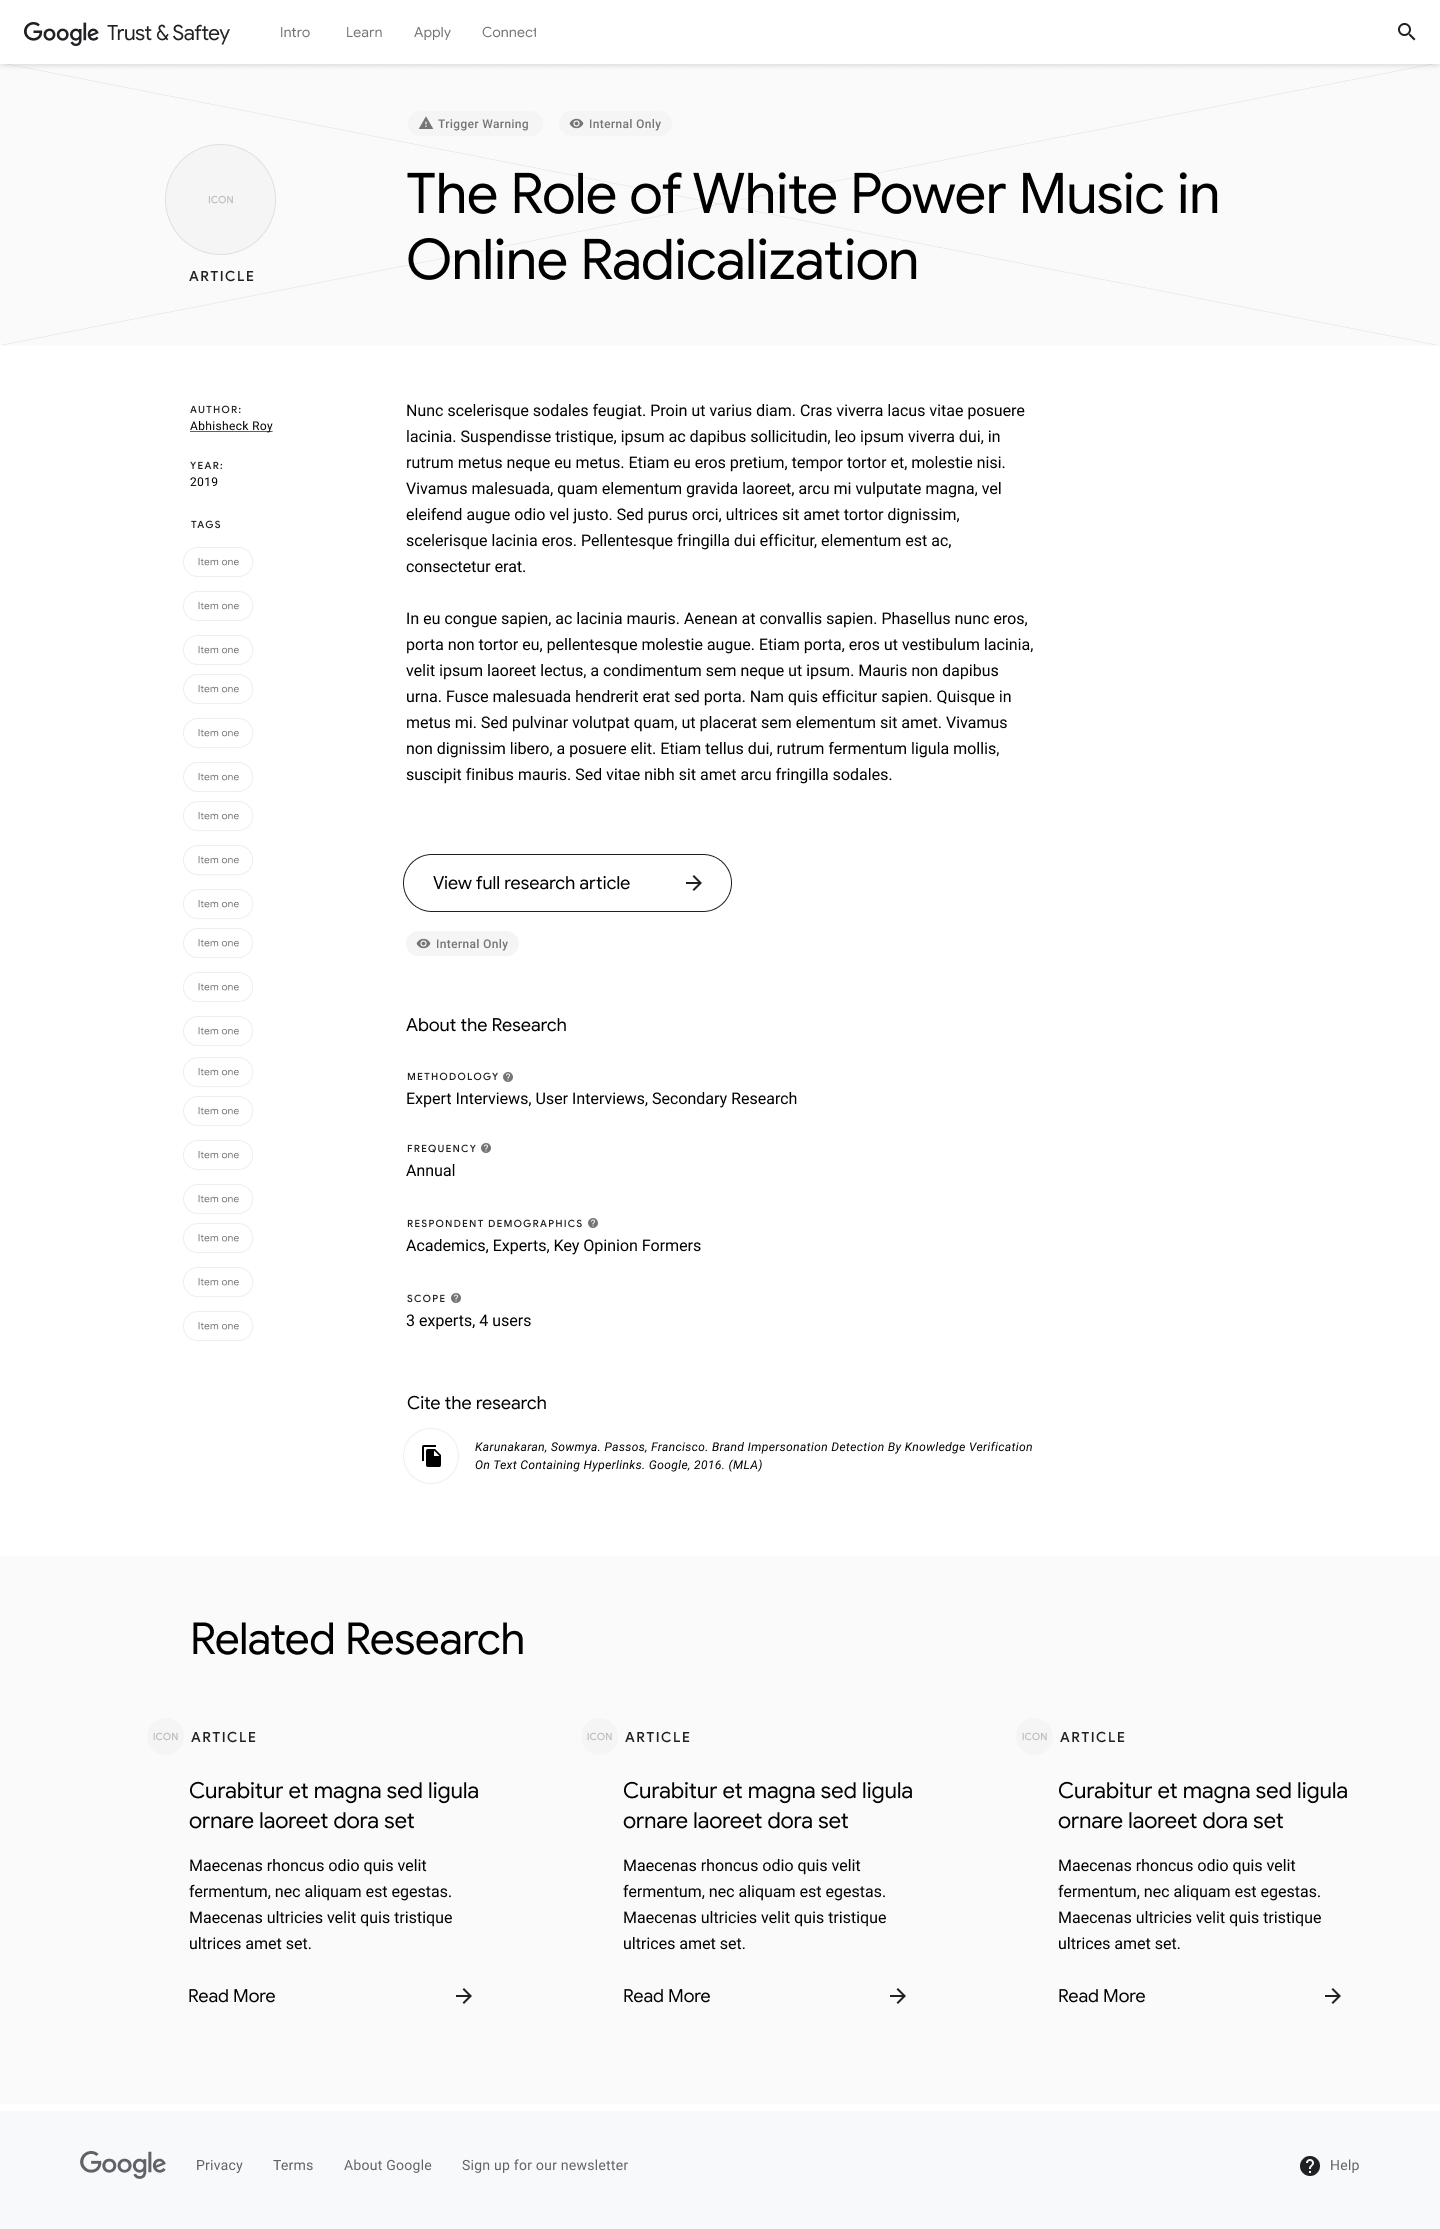 Detail Page wireframe exploration. This option prioritizes the research information and separates the columns by indexable information and research-specific information.